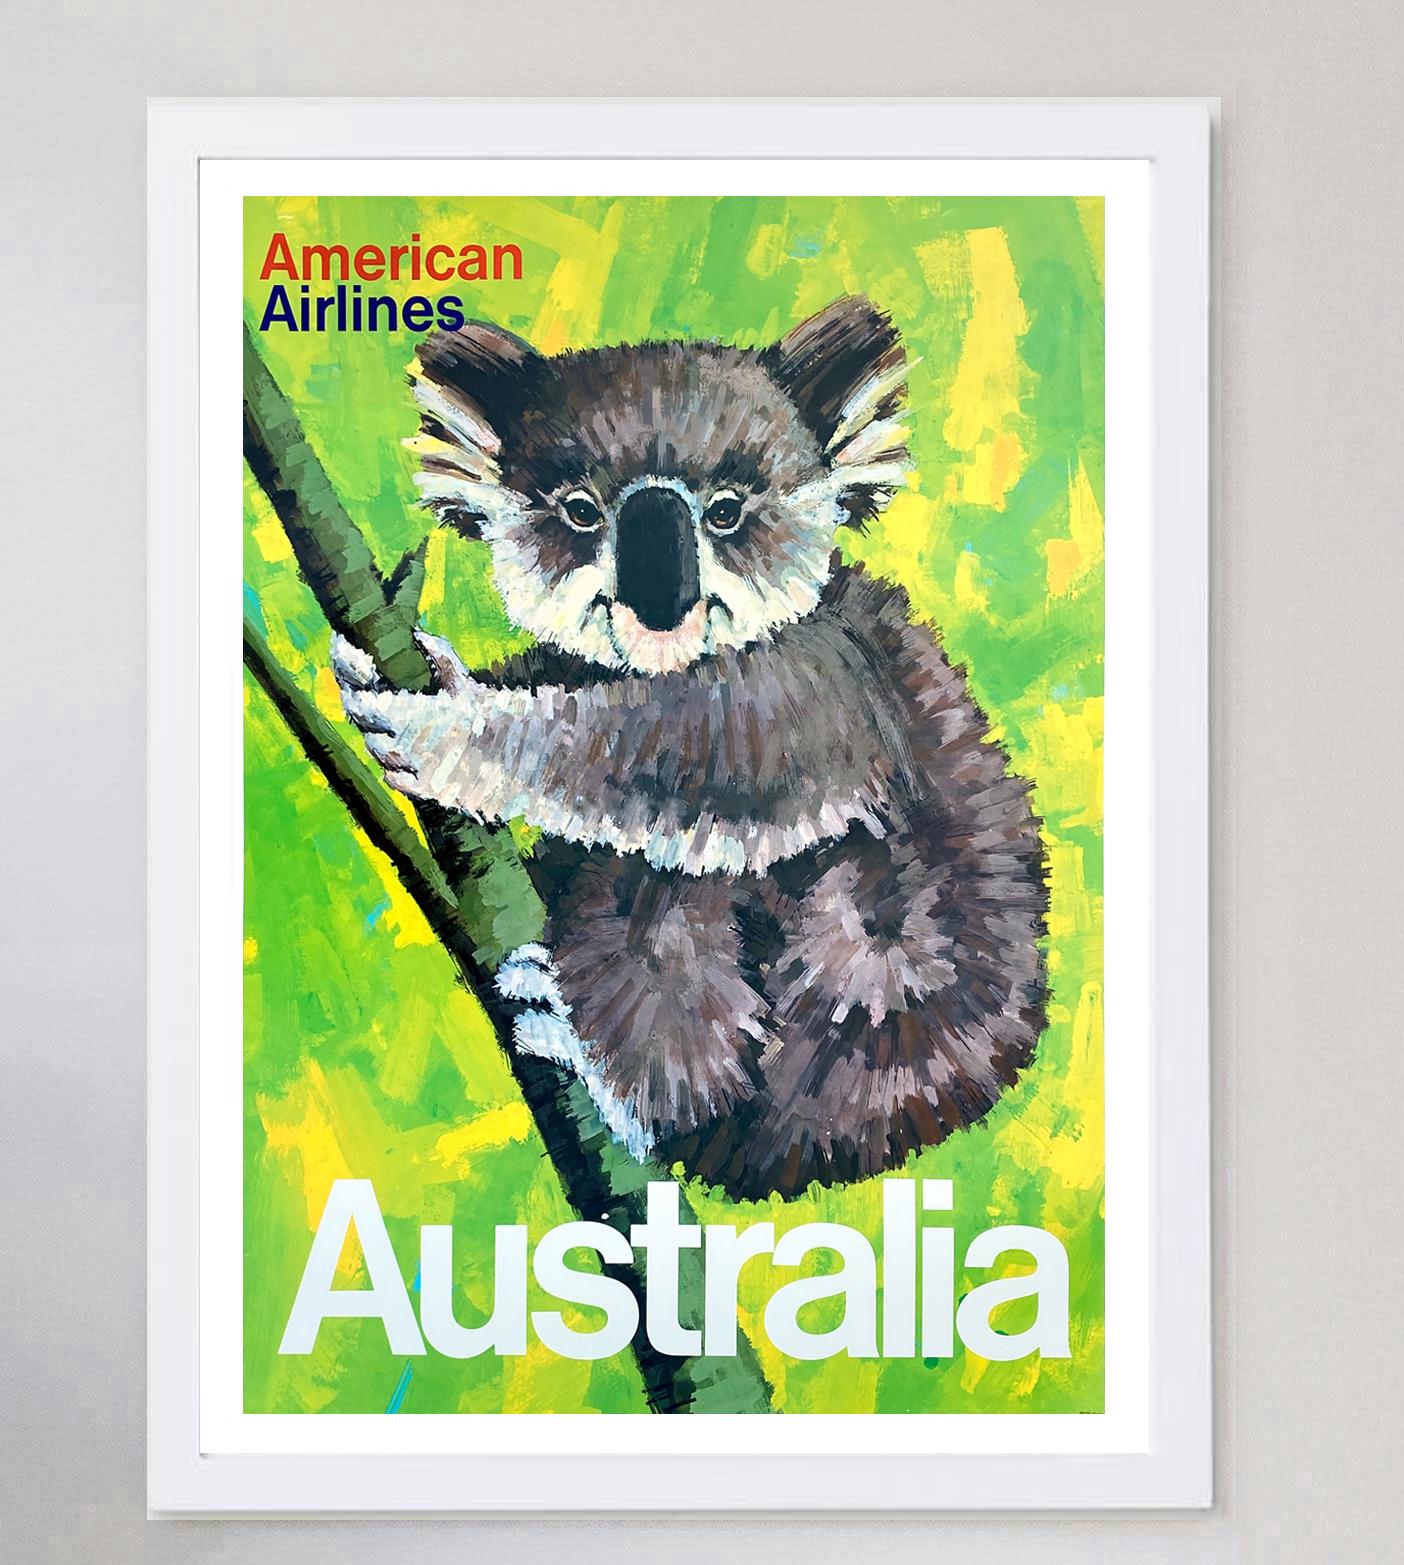 Mid-20th Century 1965 American Airlines - Australia Original Vintage Poster For Sale